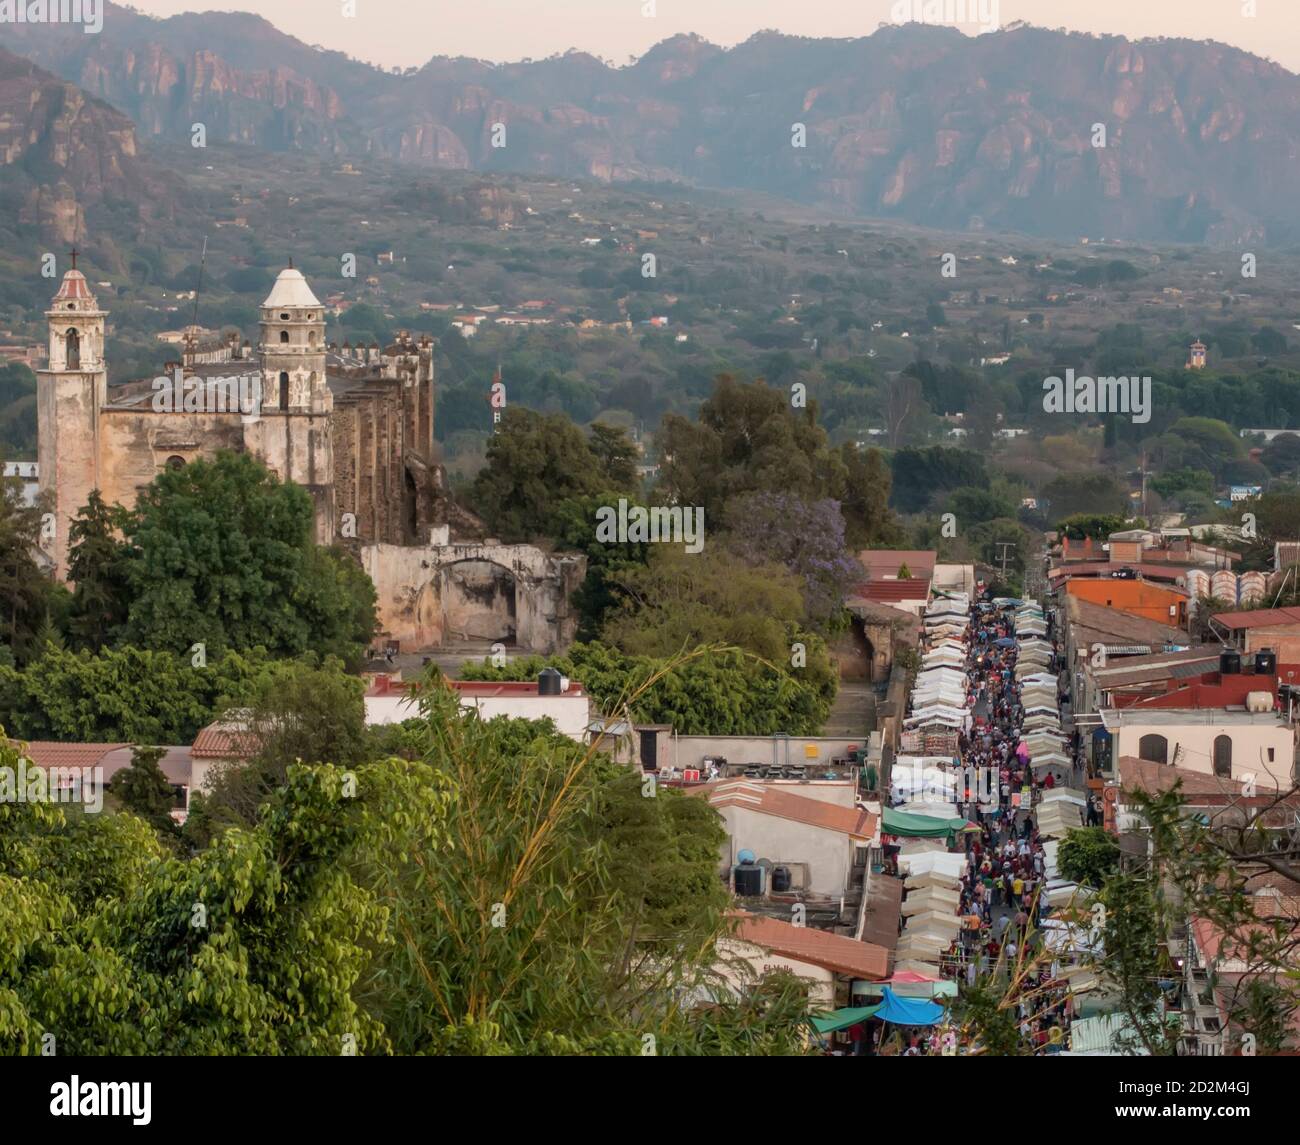 Tepoztlan, Morelos, Mexico showing the former Dominican convent and the Sunday market. Stock Photo